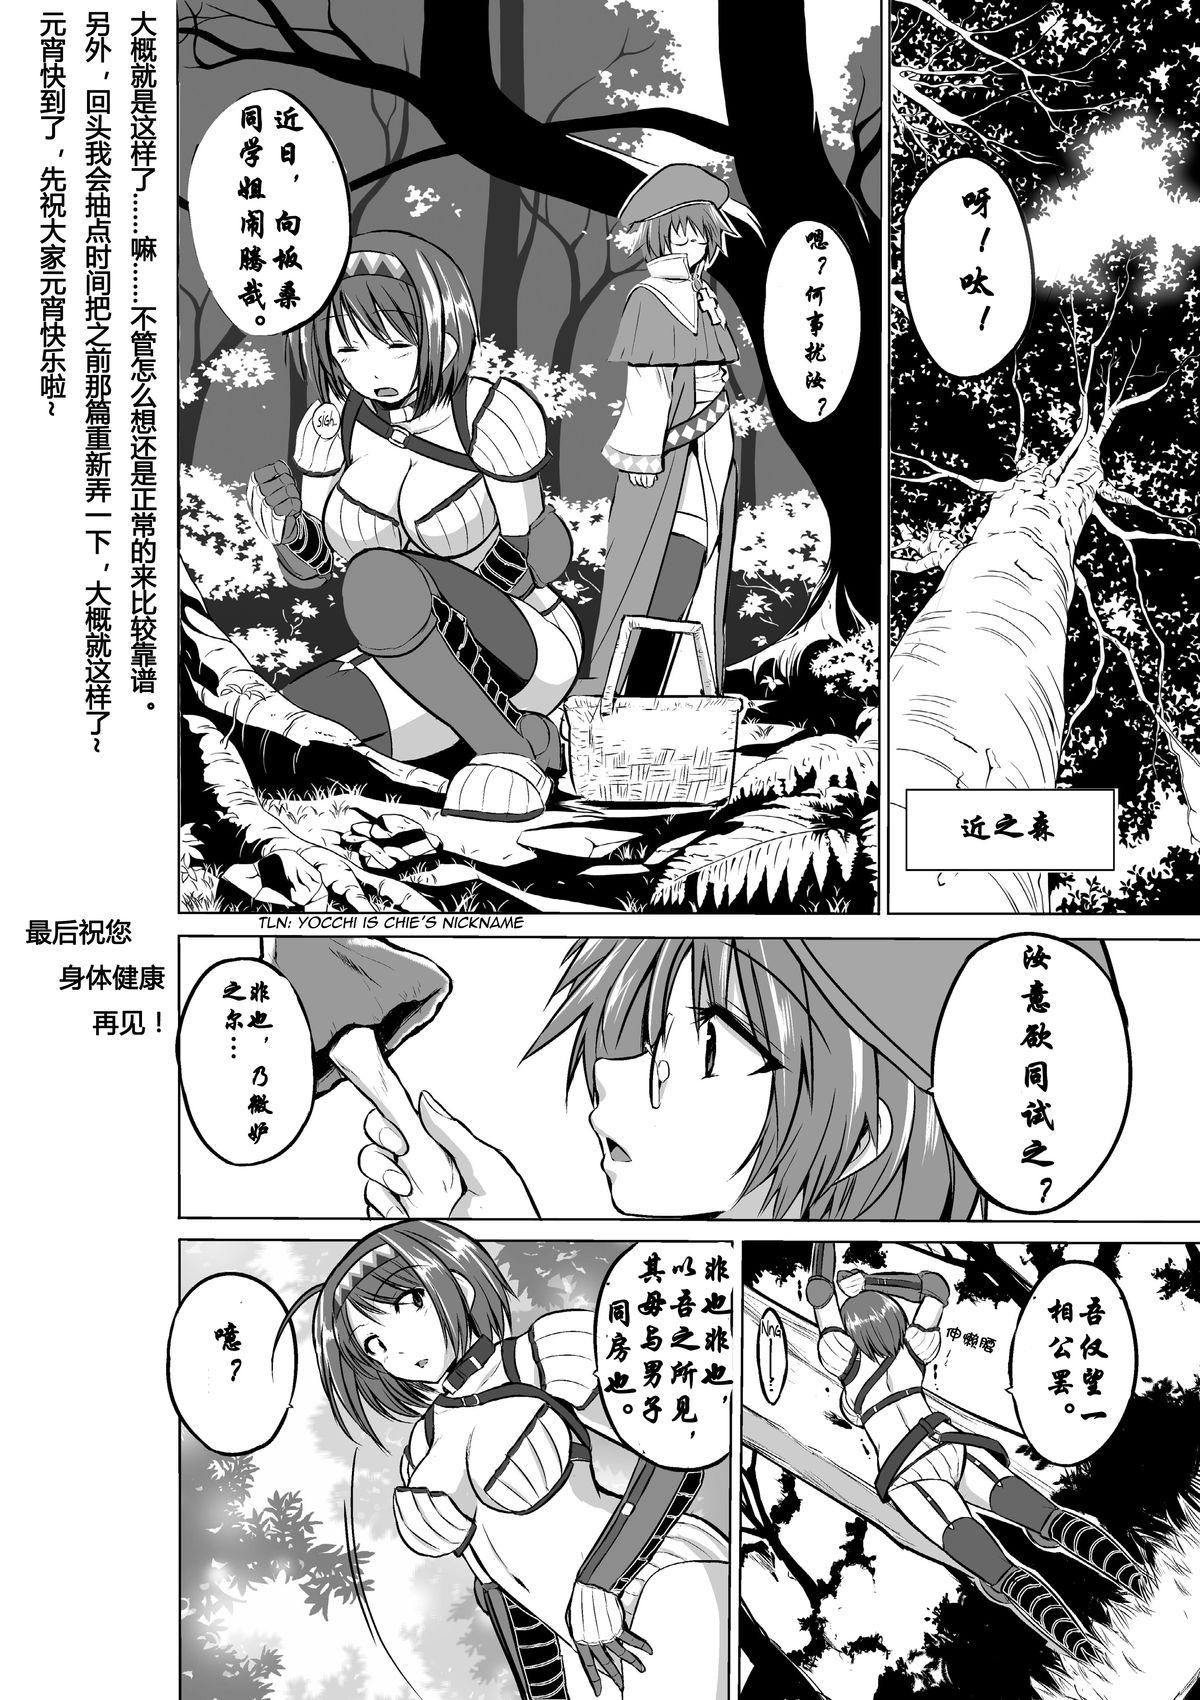 Black Gay Dungeon Travelers - Chie no Himegoto - Toheart2 Pounded - Page 29